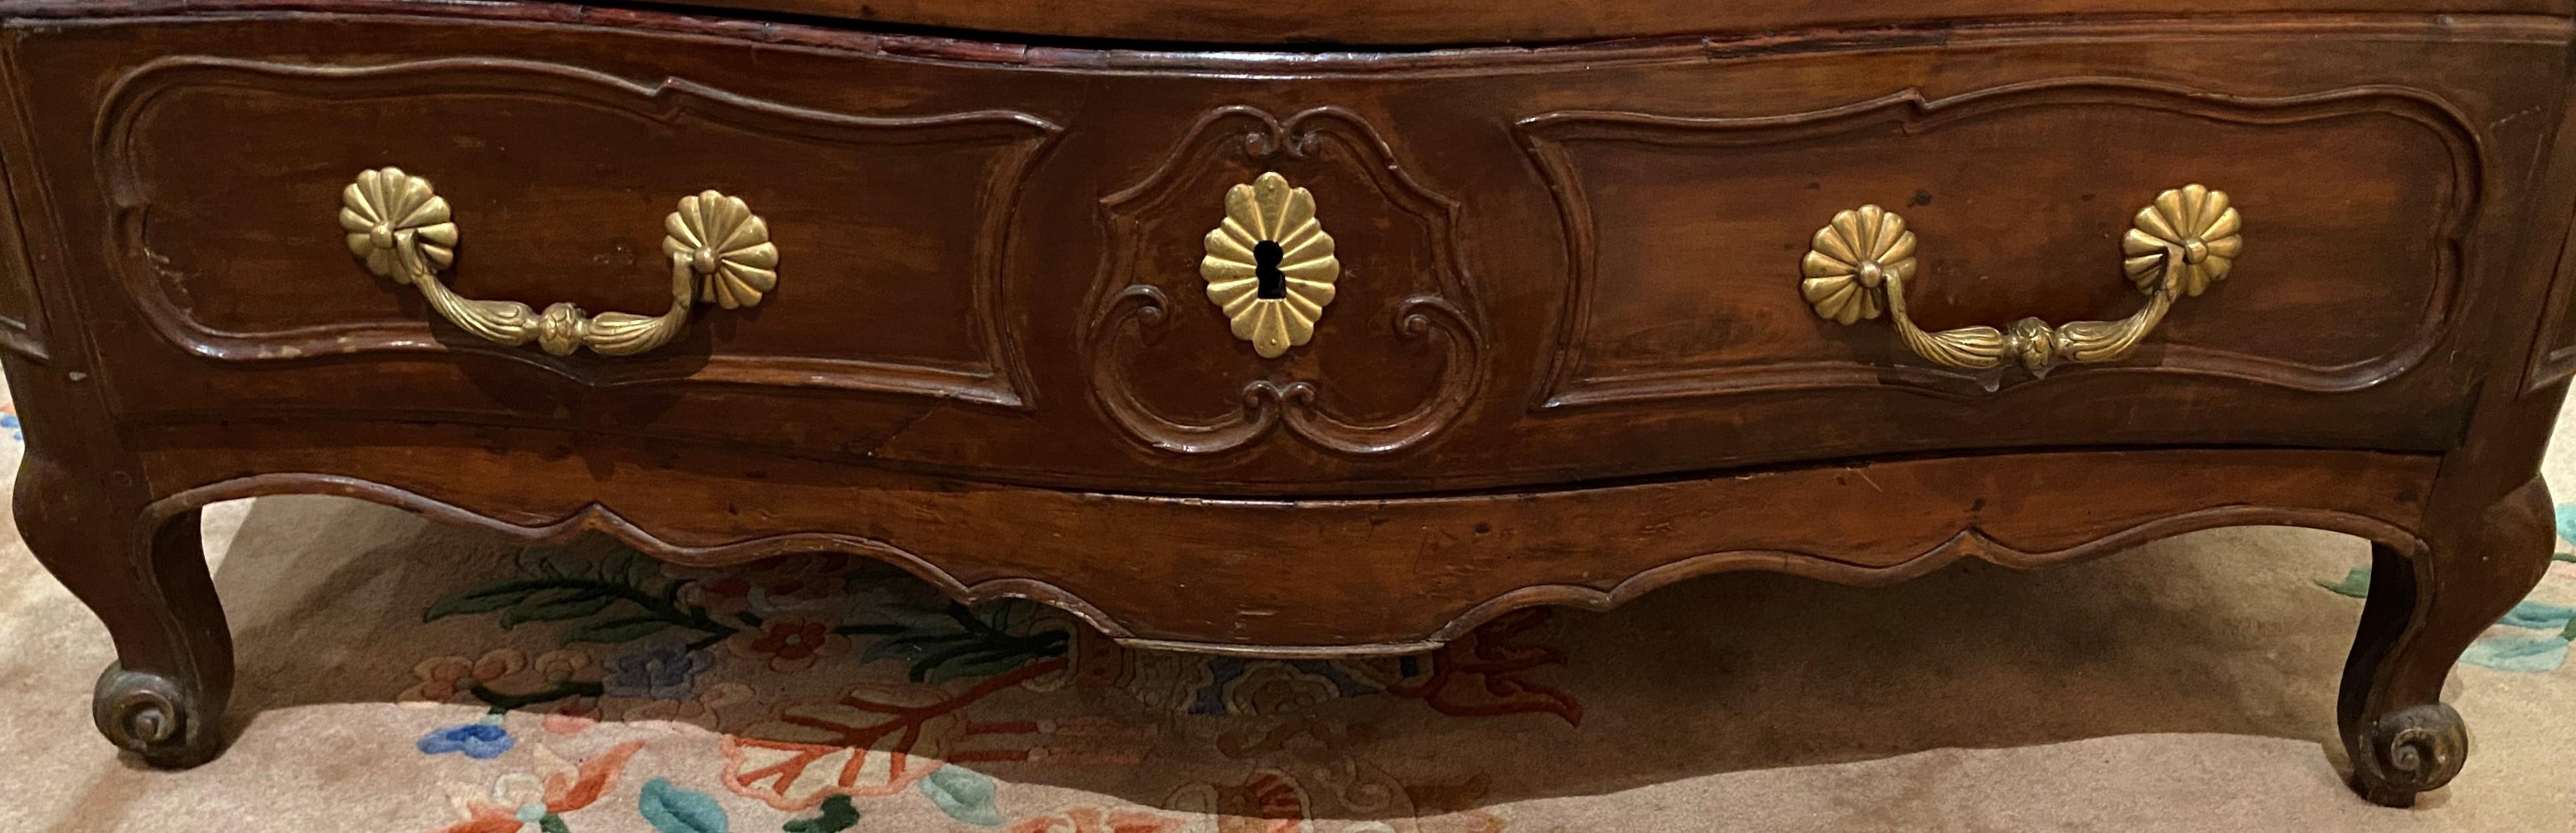 18th Century French Serpentine Three Drawer Commode with Gilt Brass Pulls  In Good Condition For Sale In Milford, NH